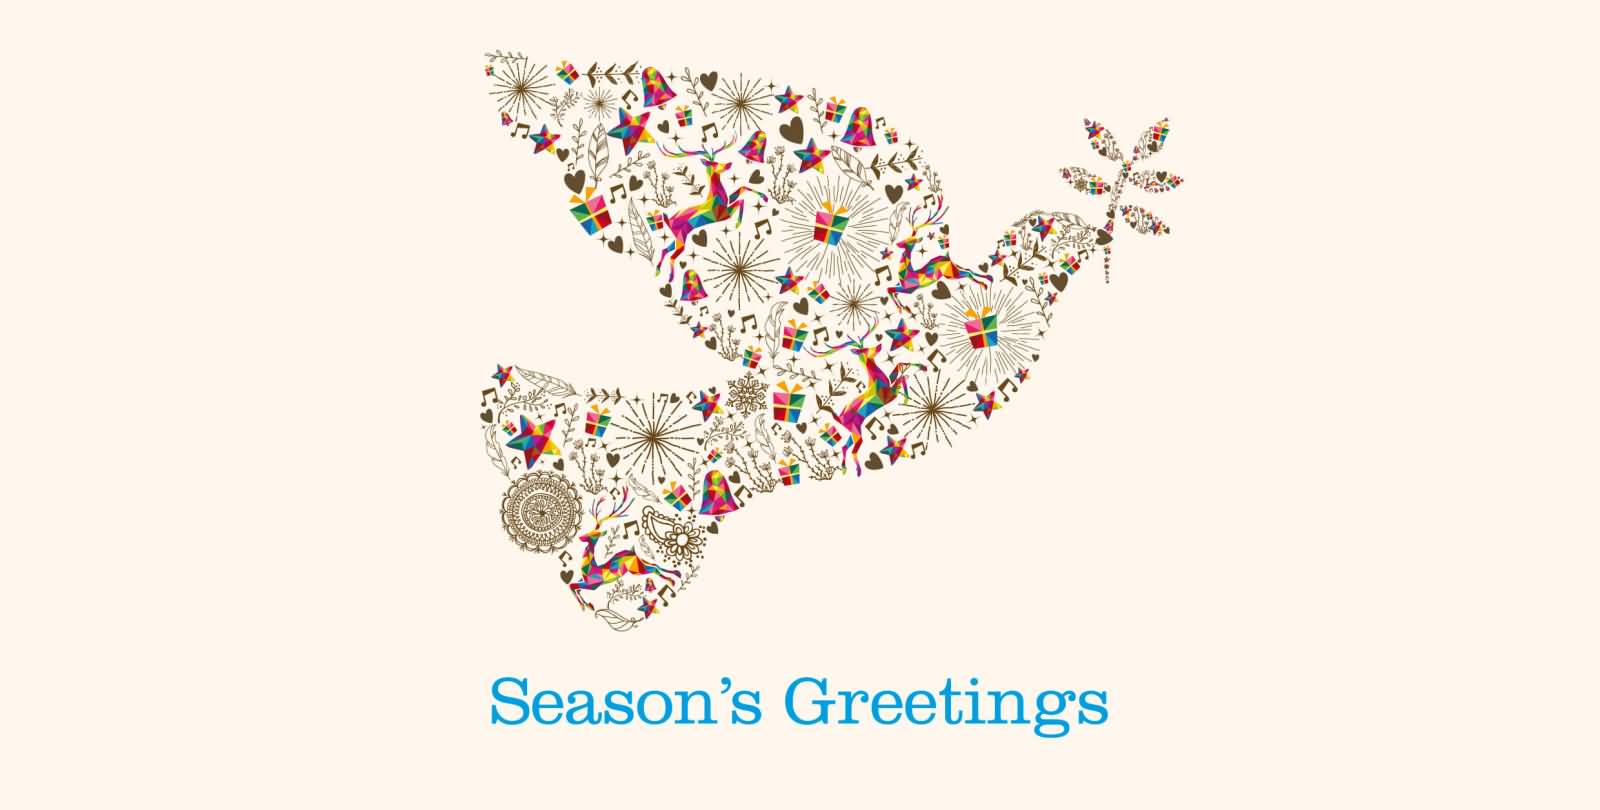 Season's Greetings Flying Dove With Olive Branch In Mouth